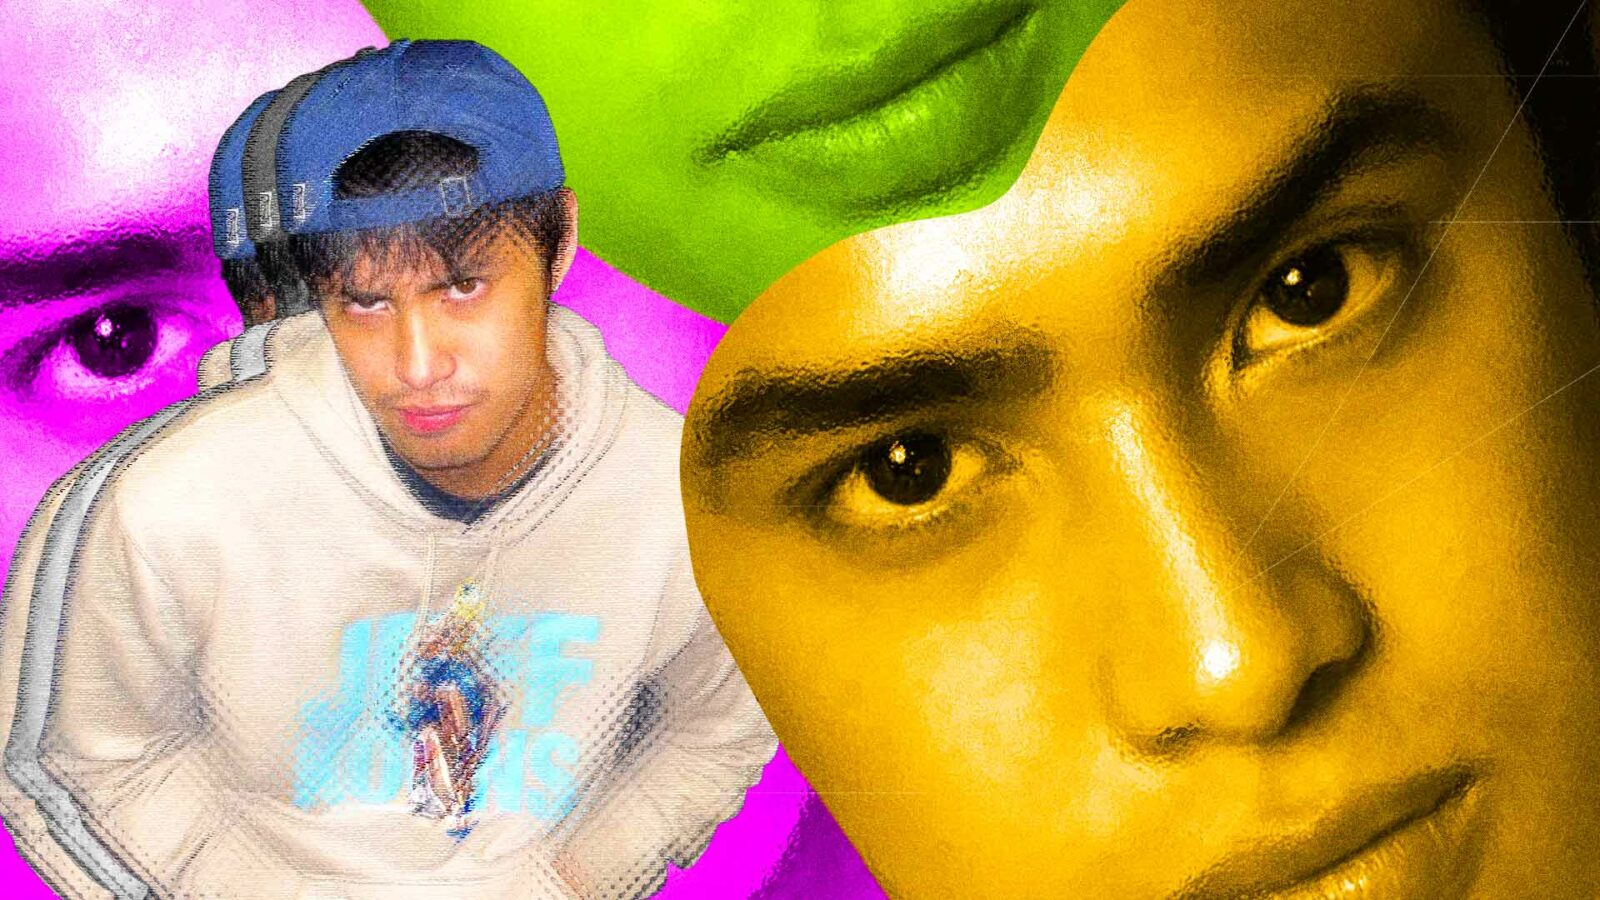 Donny-Pangilinan-Art-by-Kenneth-Dimaano